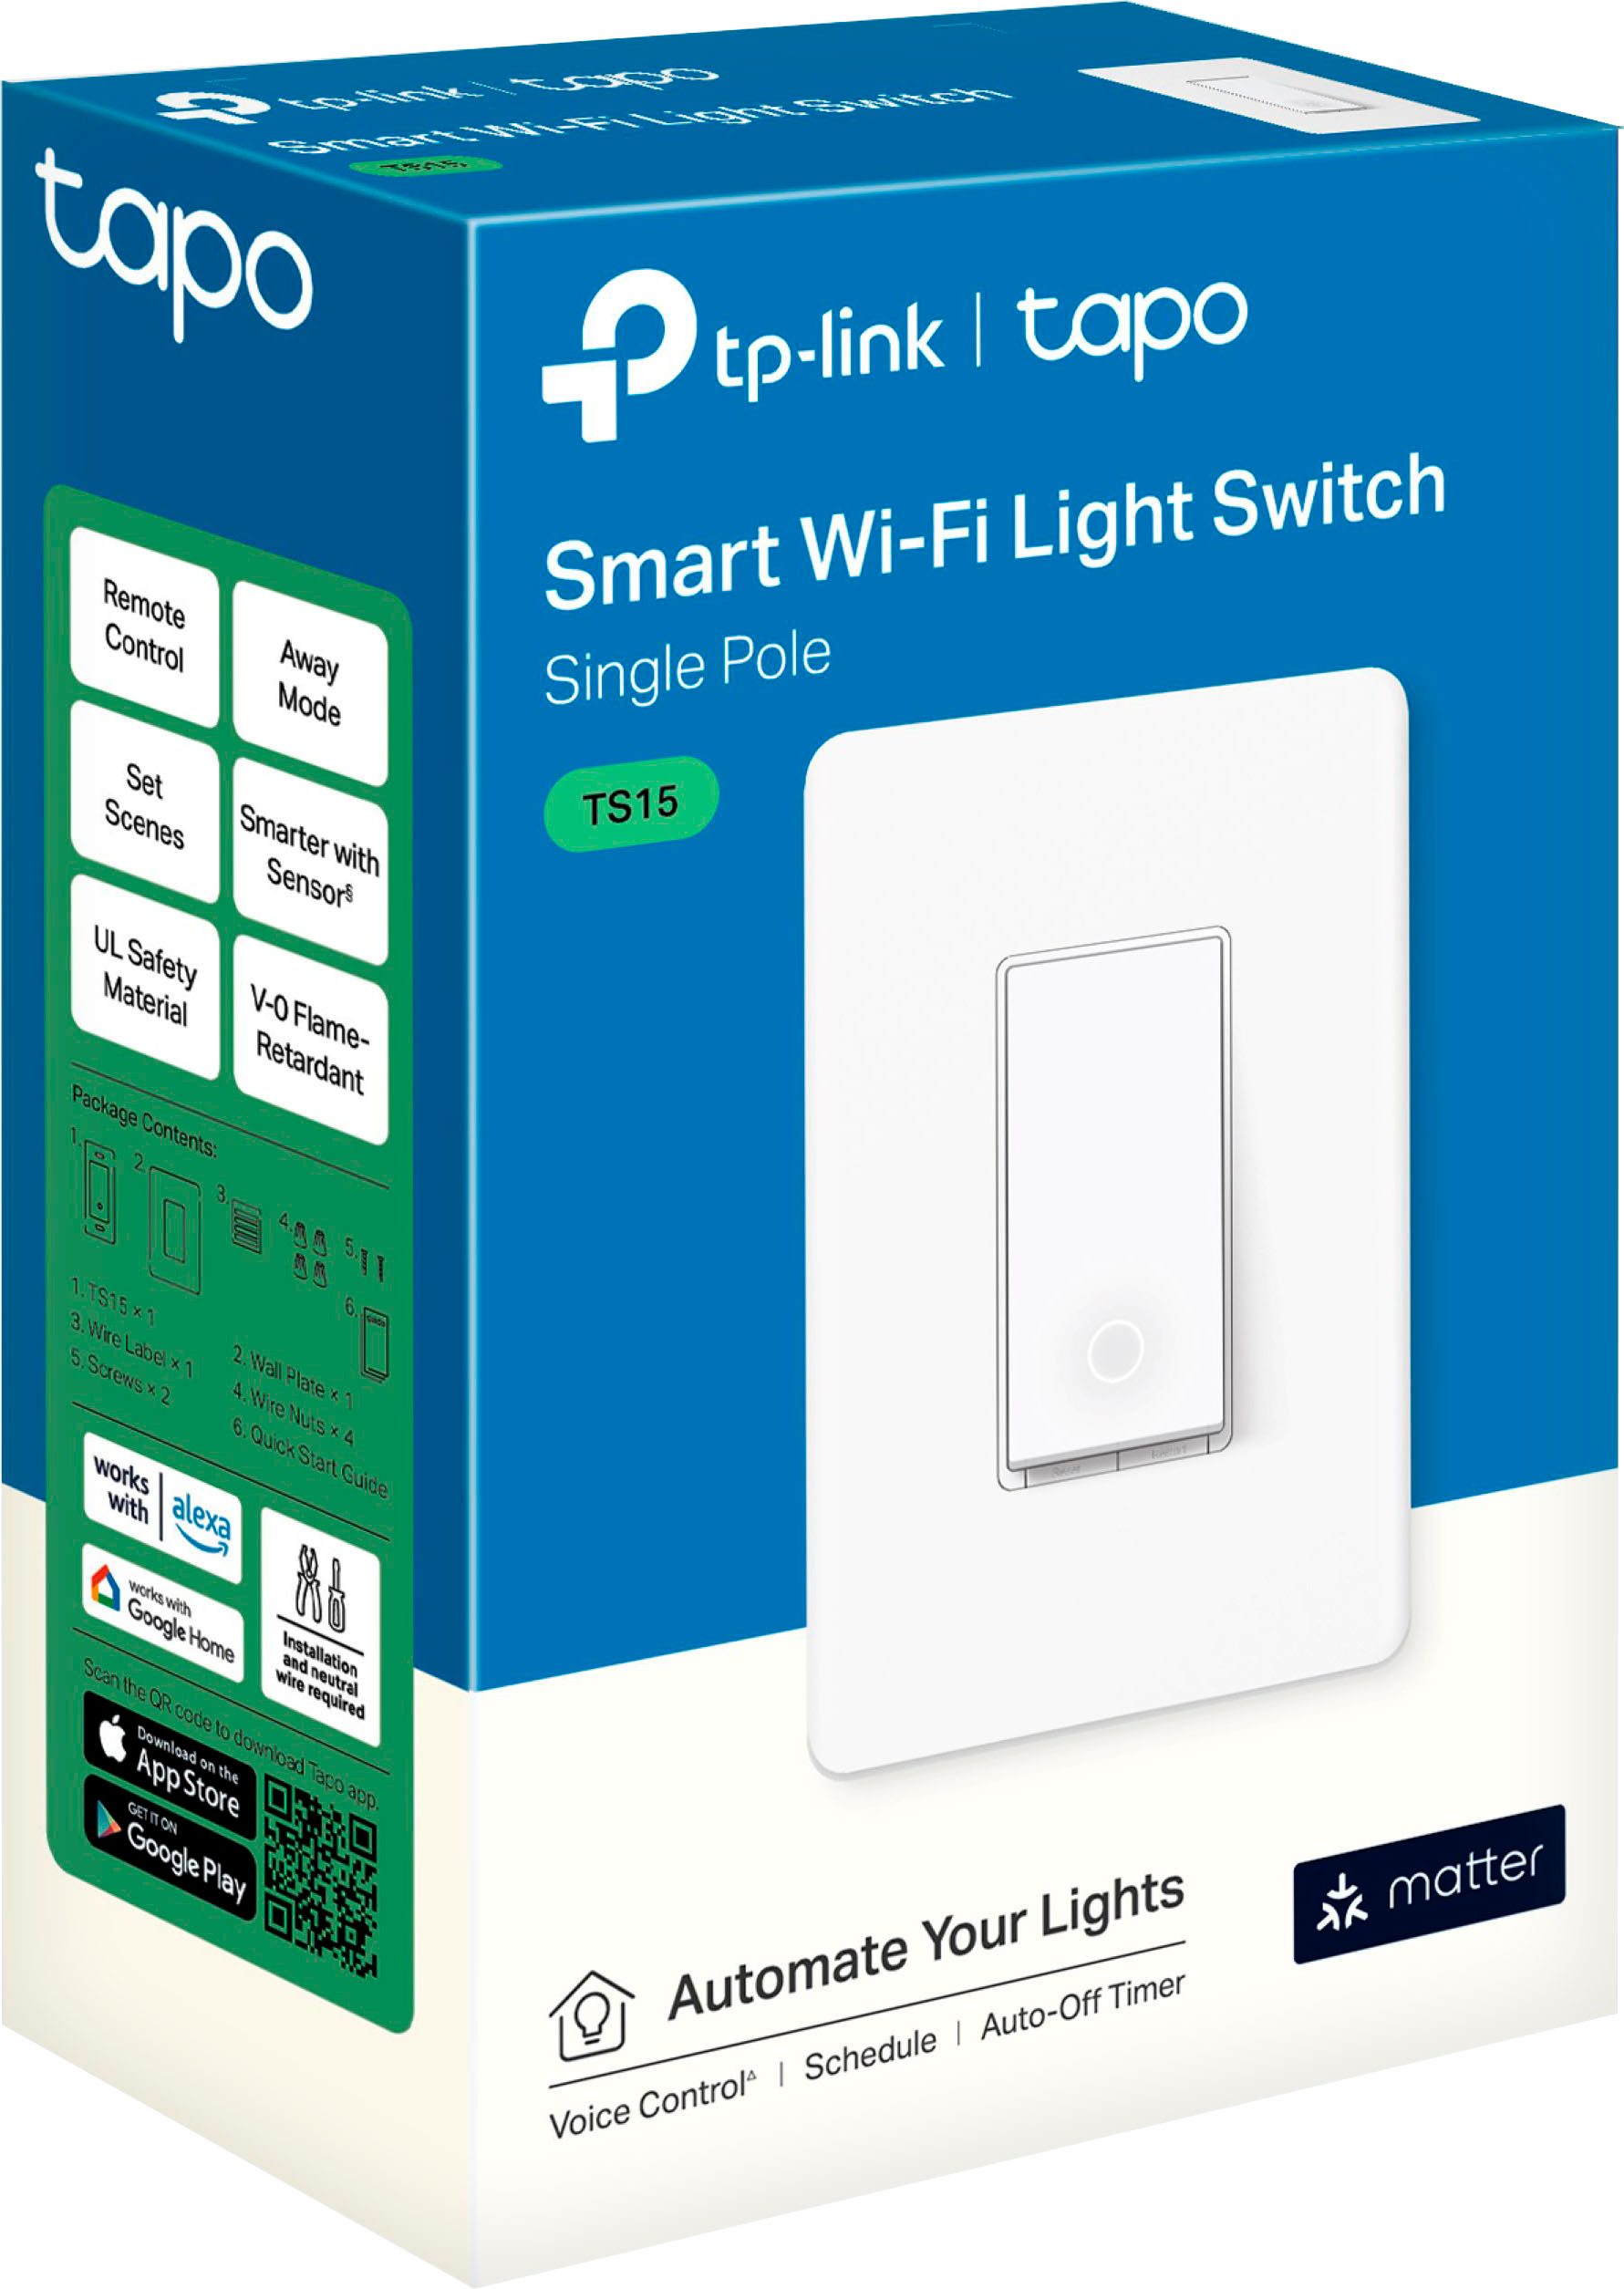 TP-Link's new Matter HomeKit light switches return to  all-time lows  from $22